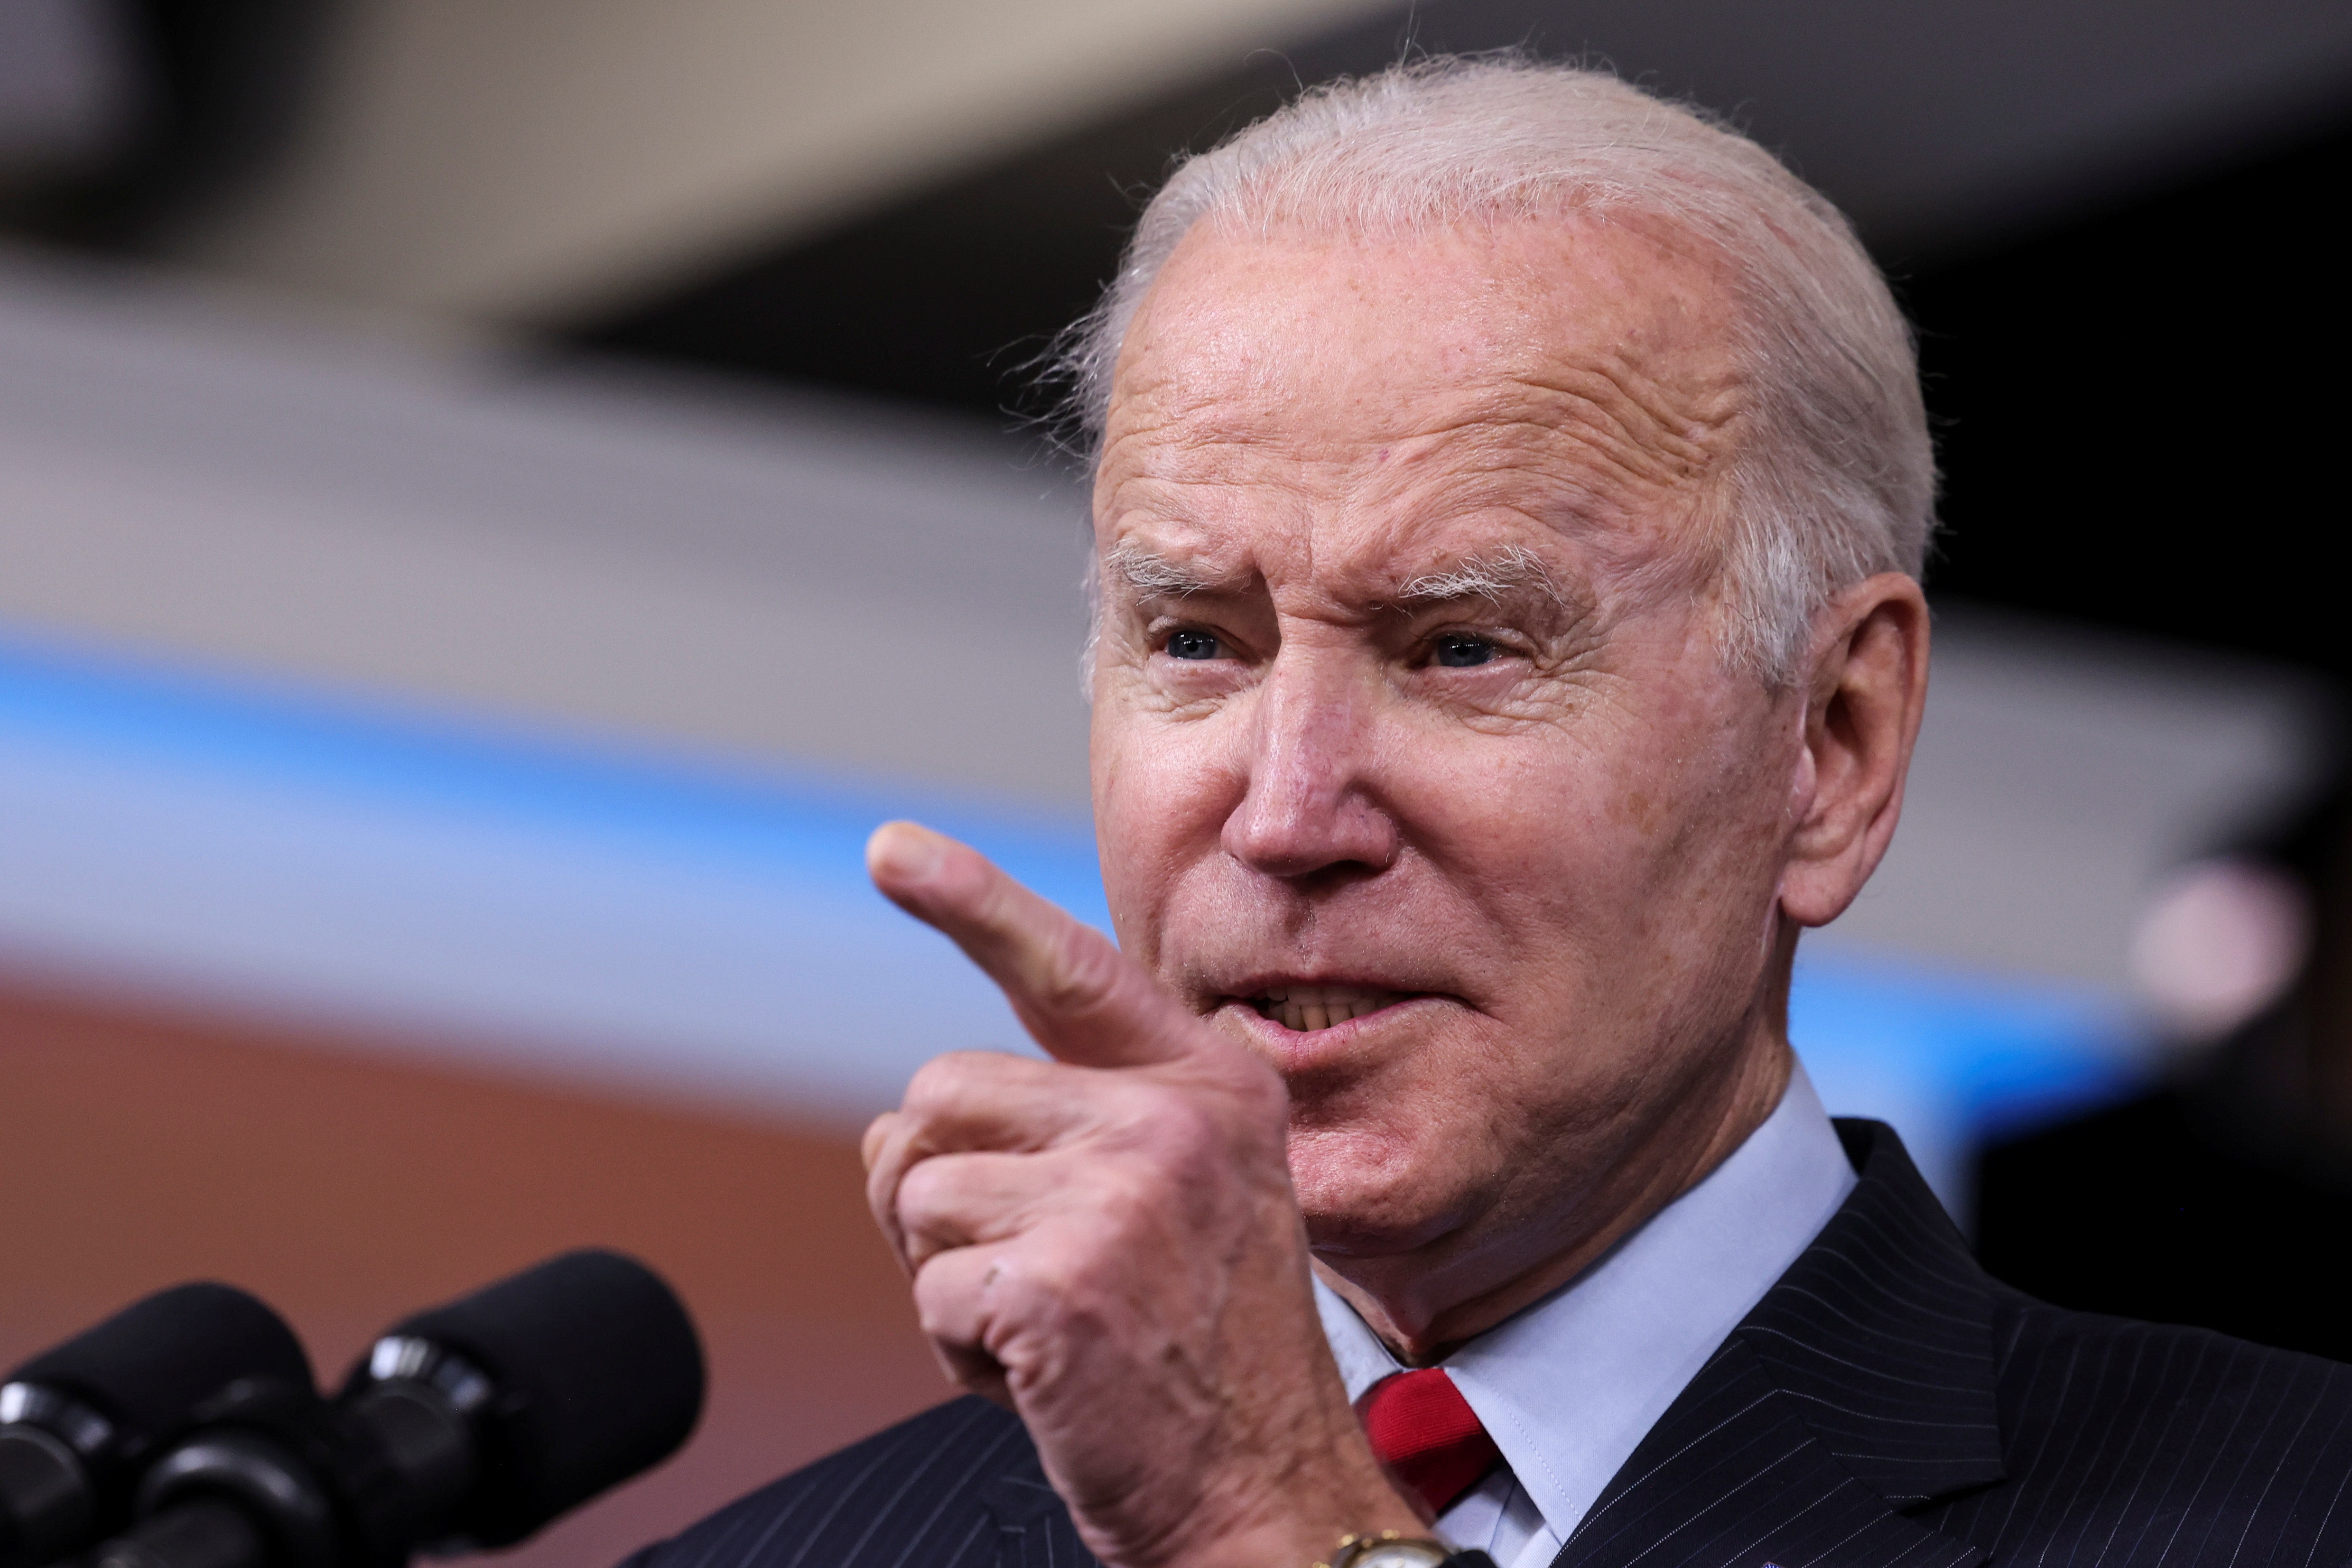 Biden says climate change policies not responsible for 'inflated gas prices' - Fox News